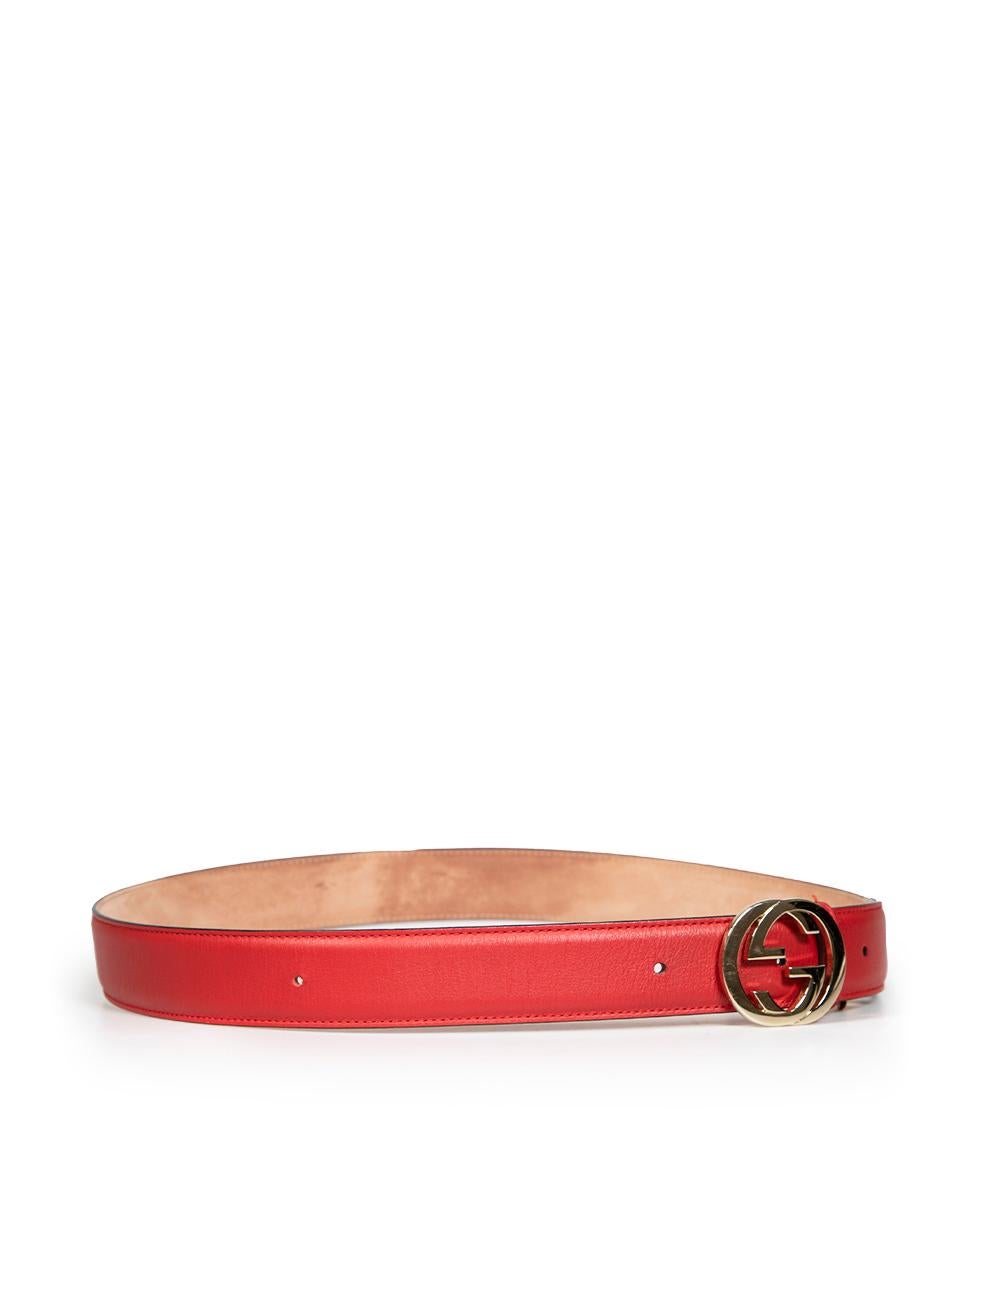 CONDITION is Very good. Minimal wear to belt is evident. Minimal wear to the underside with discoloured marks and an extra hole has been added. The buckle fastening also has scratches to the metal on this used Gucci designer resale item.
 
 Details
